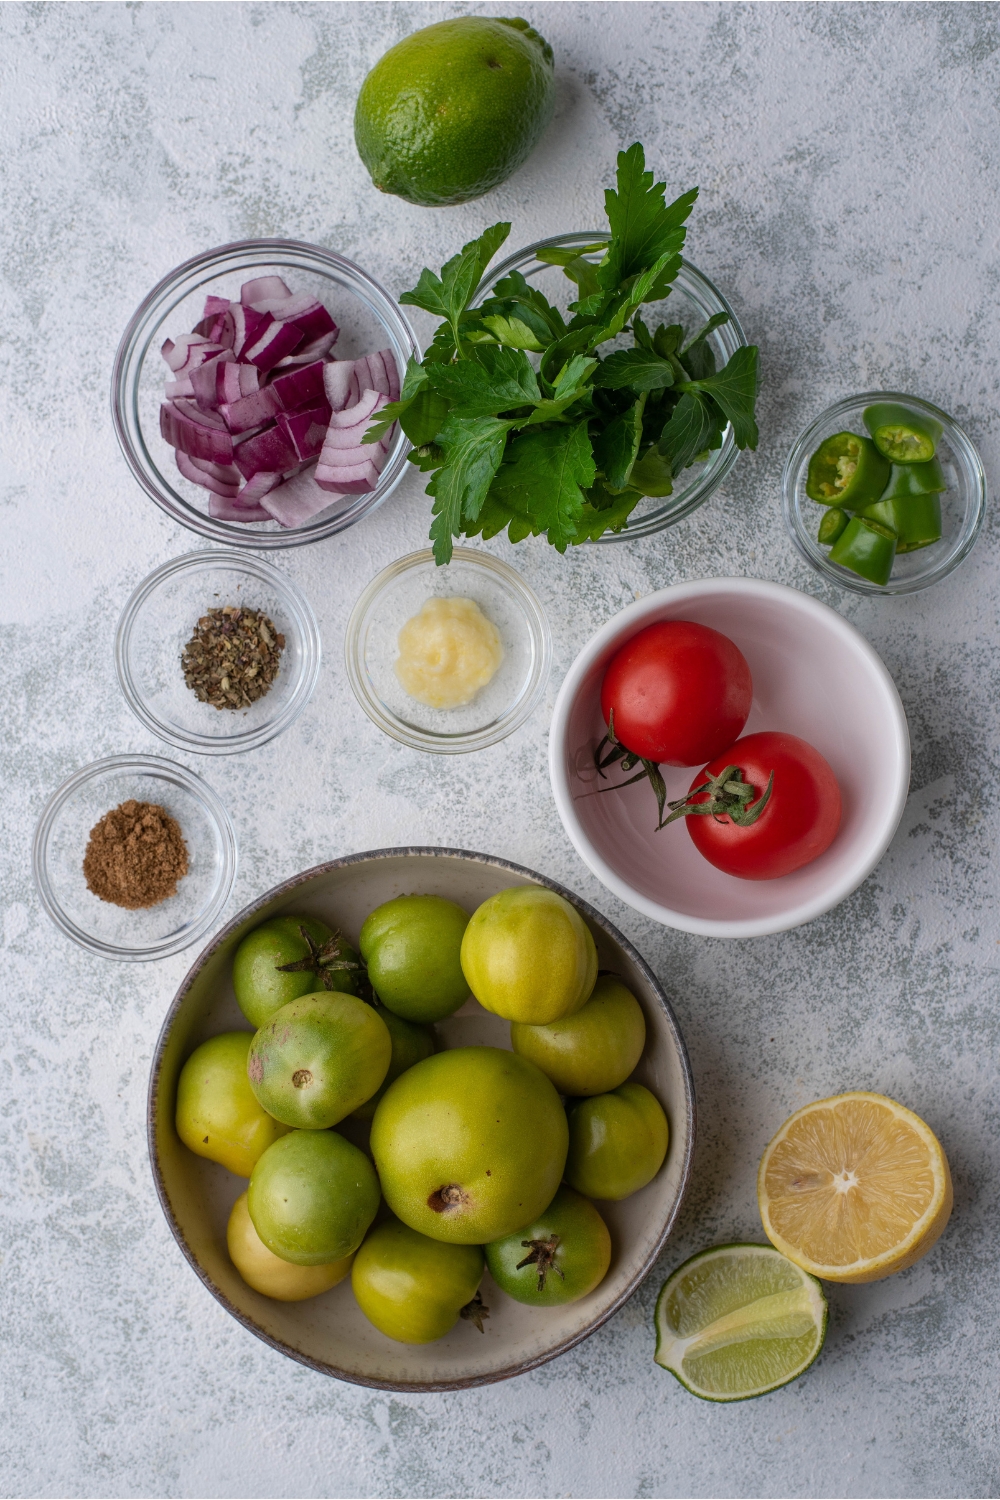 An assortment of ingredients including bowls of tomatillos and green tomatoes, a bowl of cherry tomatoes, diced red onion, sliced peppers, fresh cilantro, spices, and whole limes and lemons.